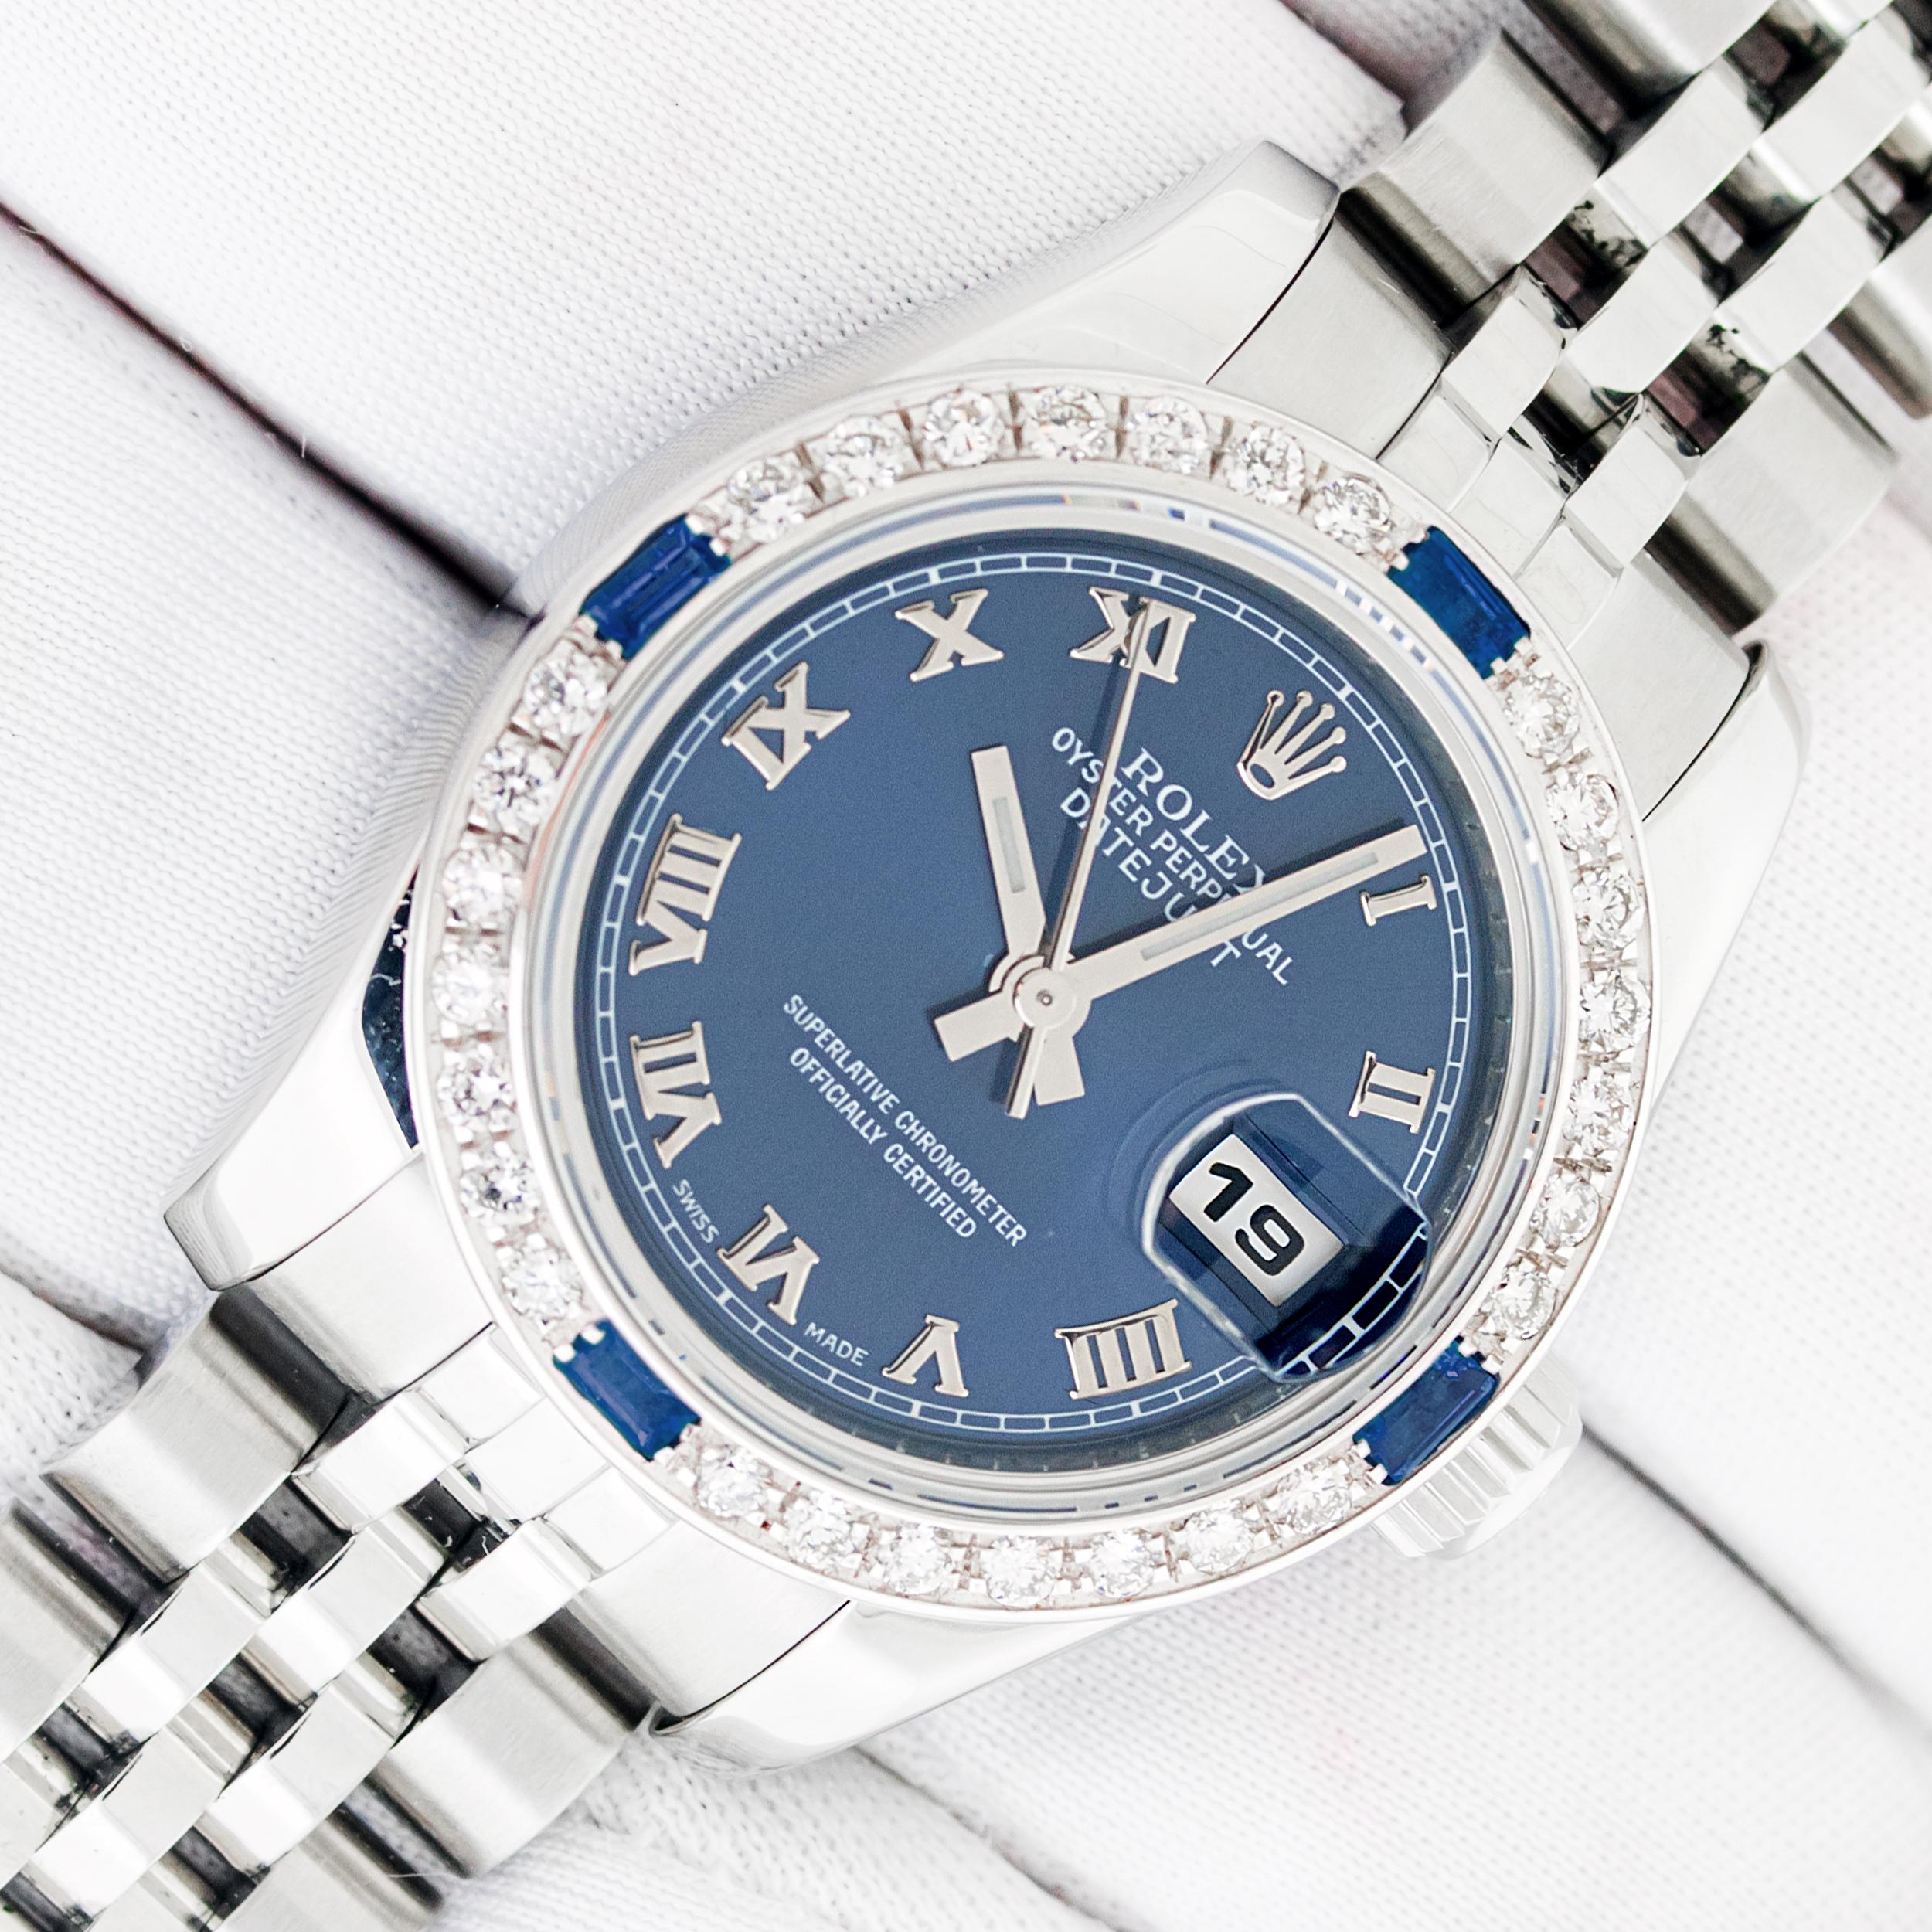 This Rolex Rolesor Oyster Perpetual Datejust Has Recently been Serviced, Polished and it’s in a Good Condition.

WATCH INFORMATION 

DIAL (FACE) 

Rolex Blue Dial with Roman Numeral Markers. 
New Scratch Resistant Aftermarket Sapphire Crystal with